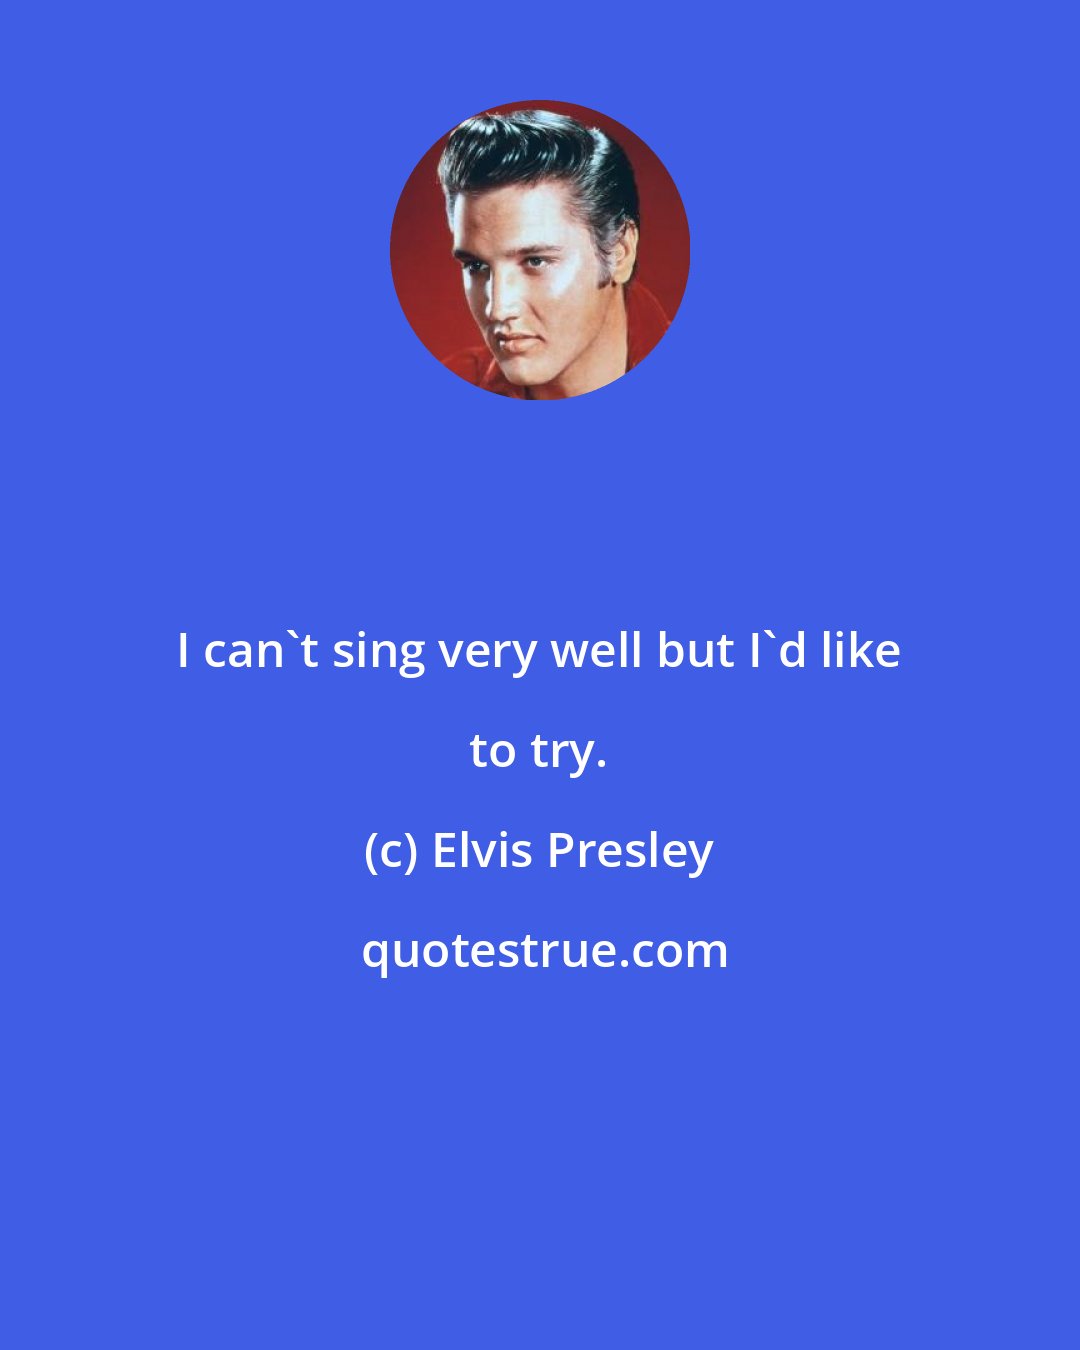 Elvis Presley: I can't sing very well but I'd like to try.